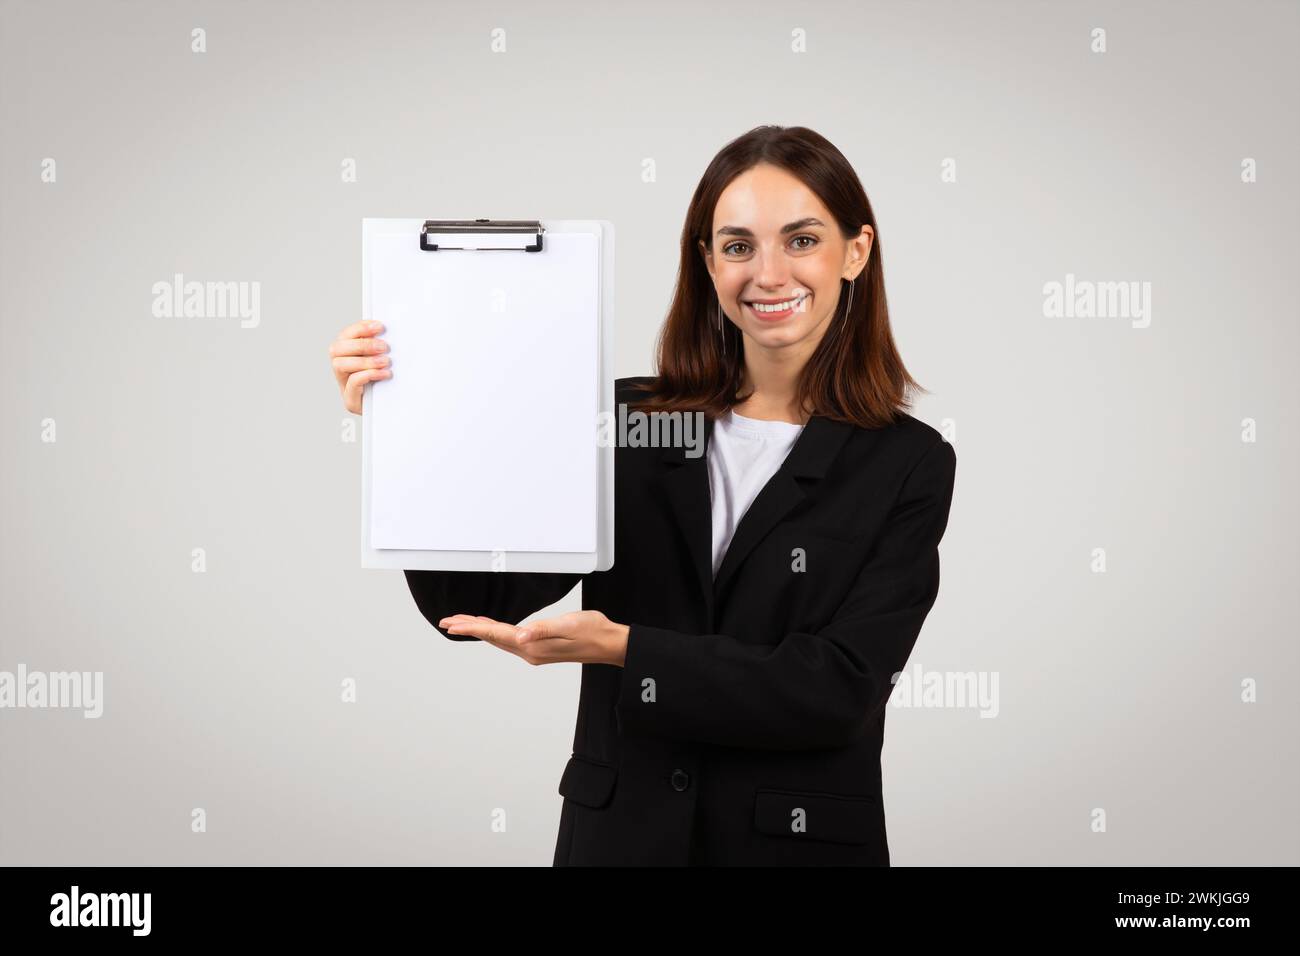 A professional young woman in a black suit confidently presents a blank white clipboard with a smile Stock Photo